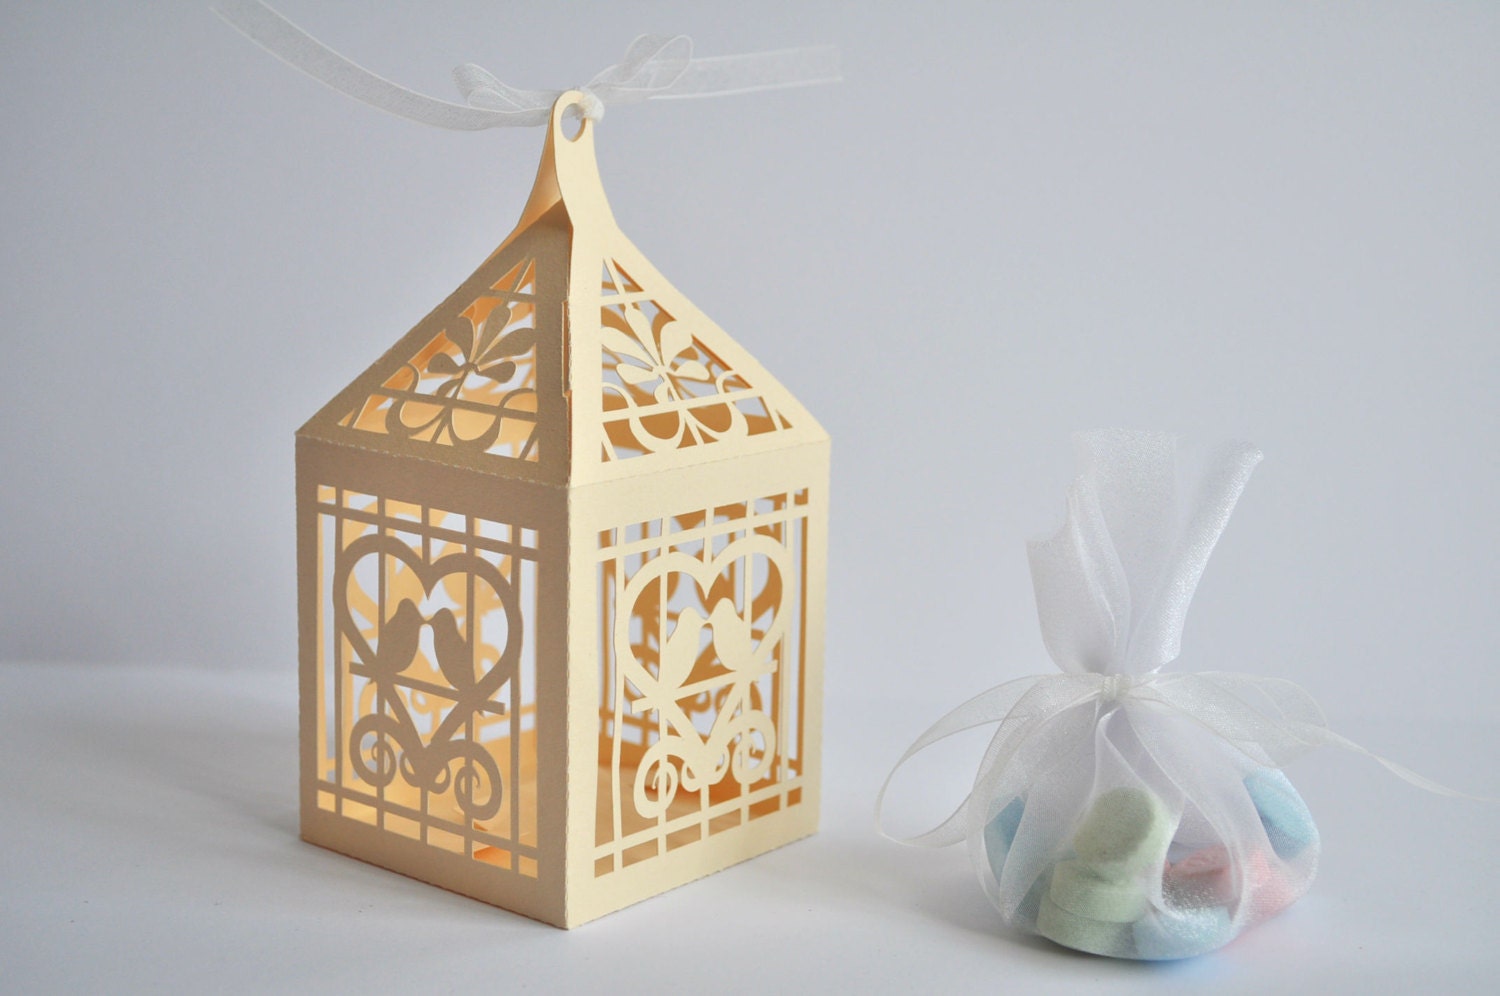 Download Love Birds Lantern Favor Box or Gift Box: SVG file by bypixiedust